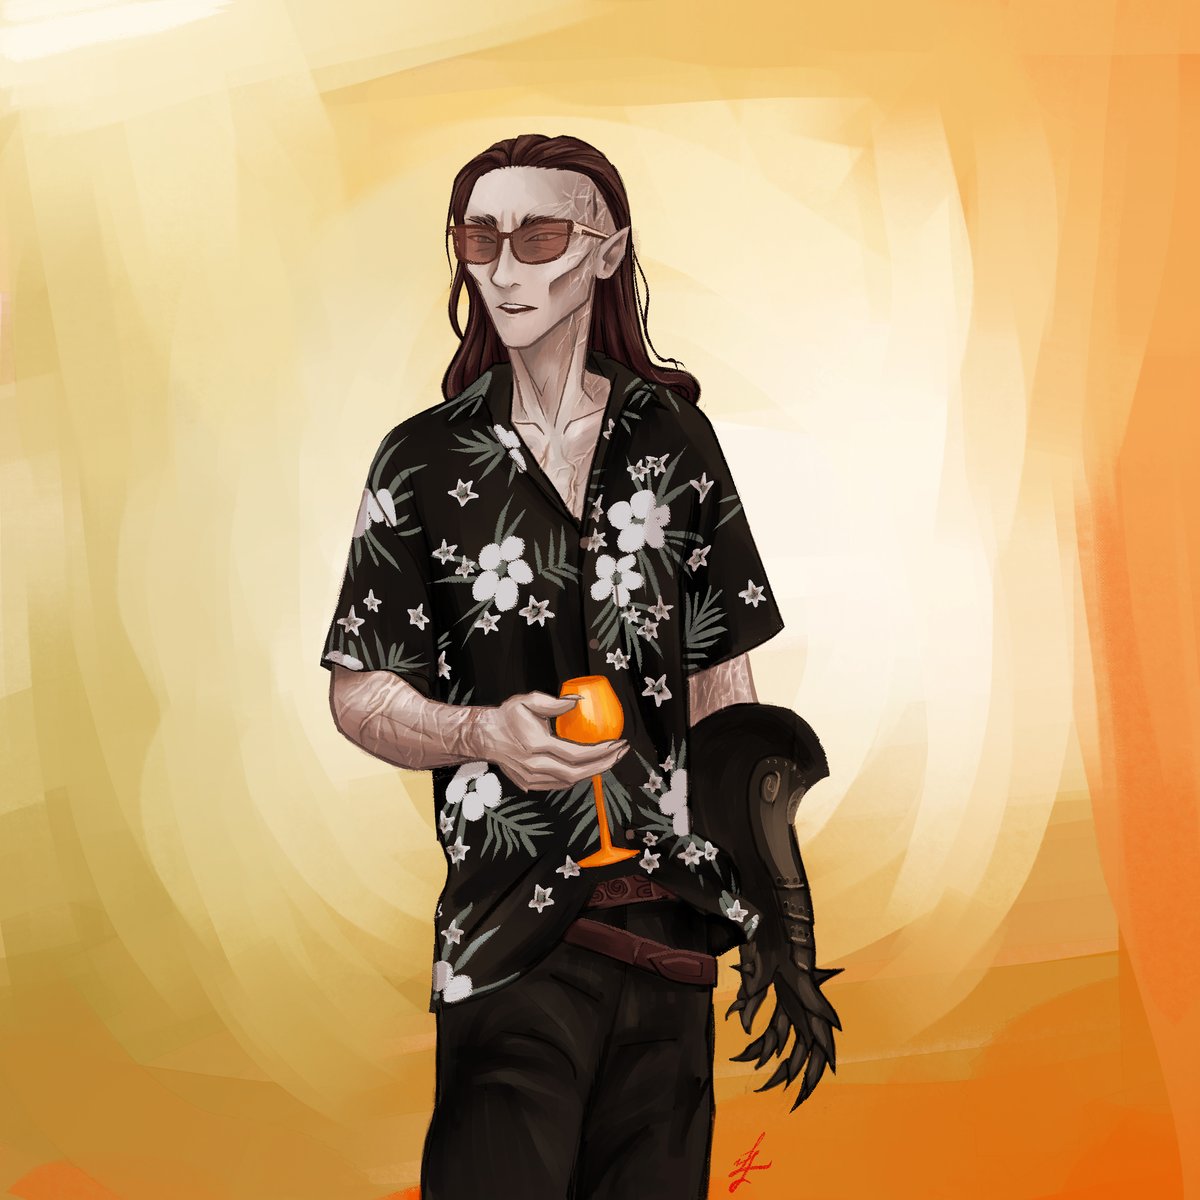 Adar in a tropical shirt and gauntlet enjoying a drink for an improvised Tumblr challenge😆 (First experiments with Clip Studio Paint🥳)